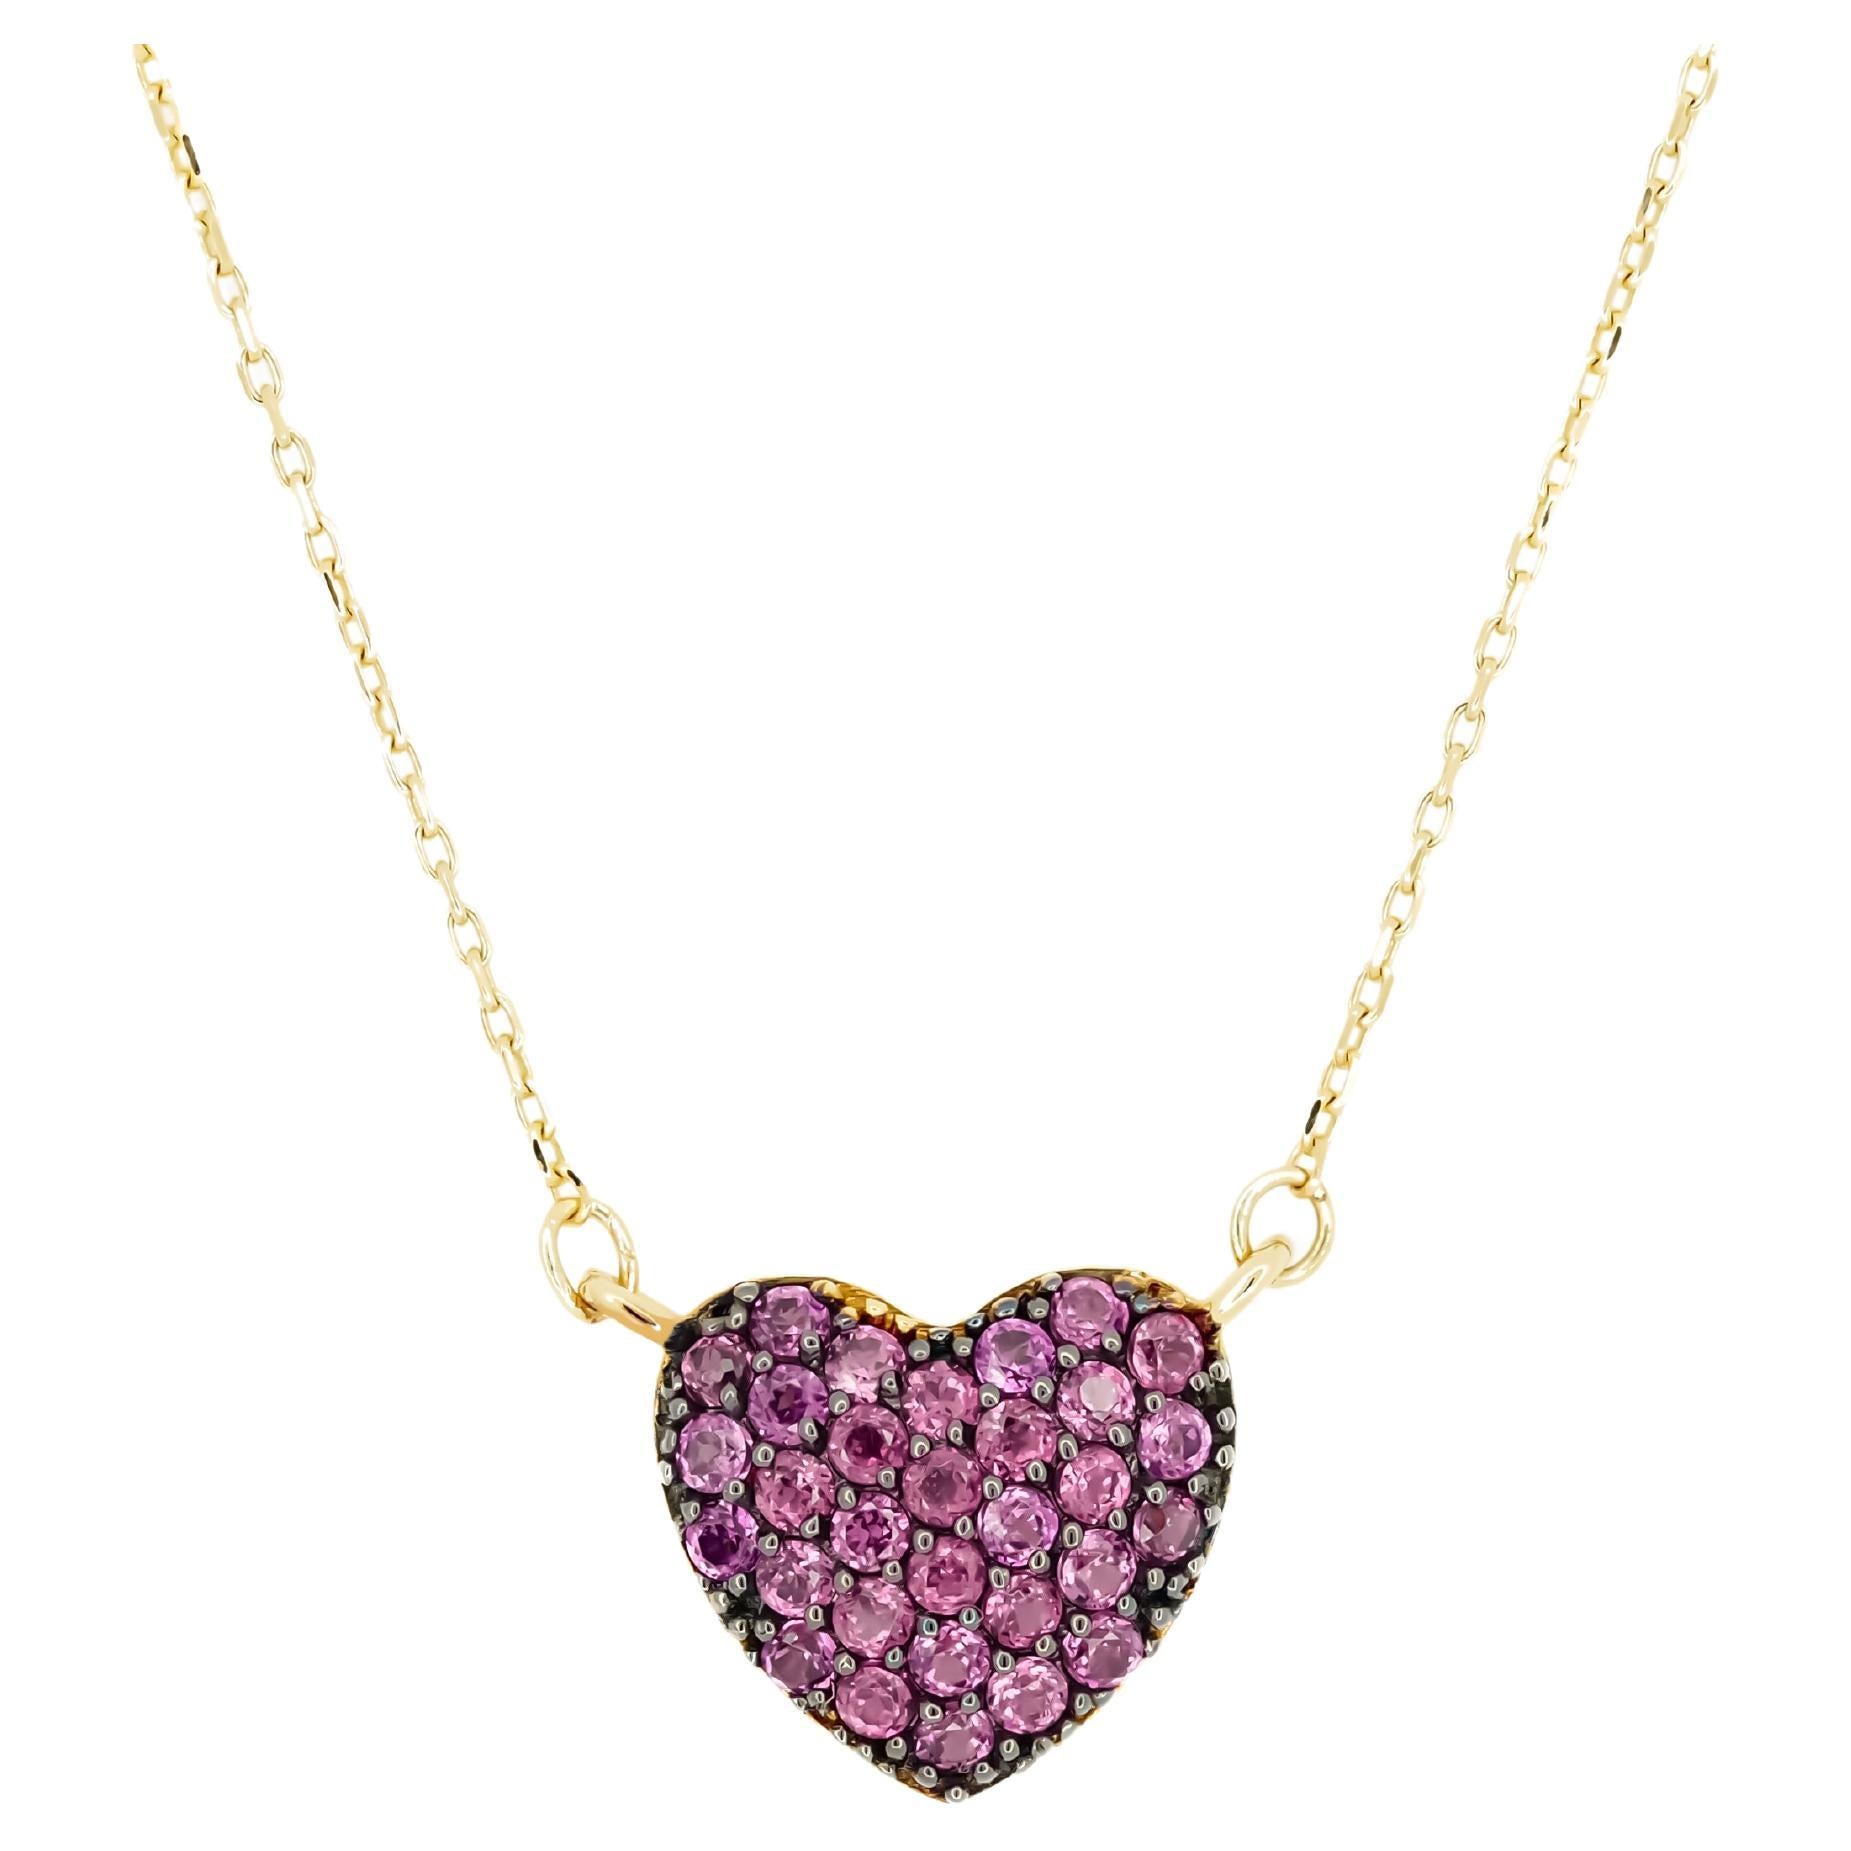 Heart Pendant necklace in 14k gold 